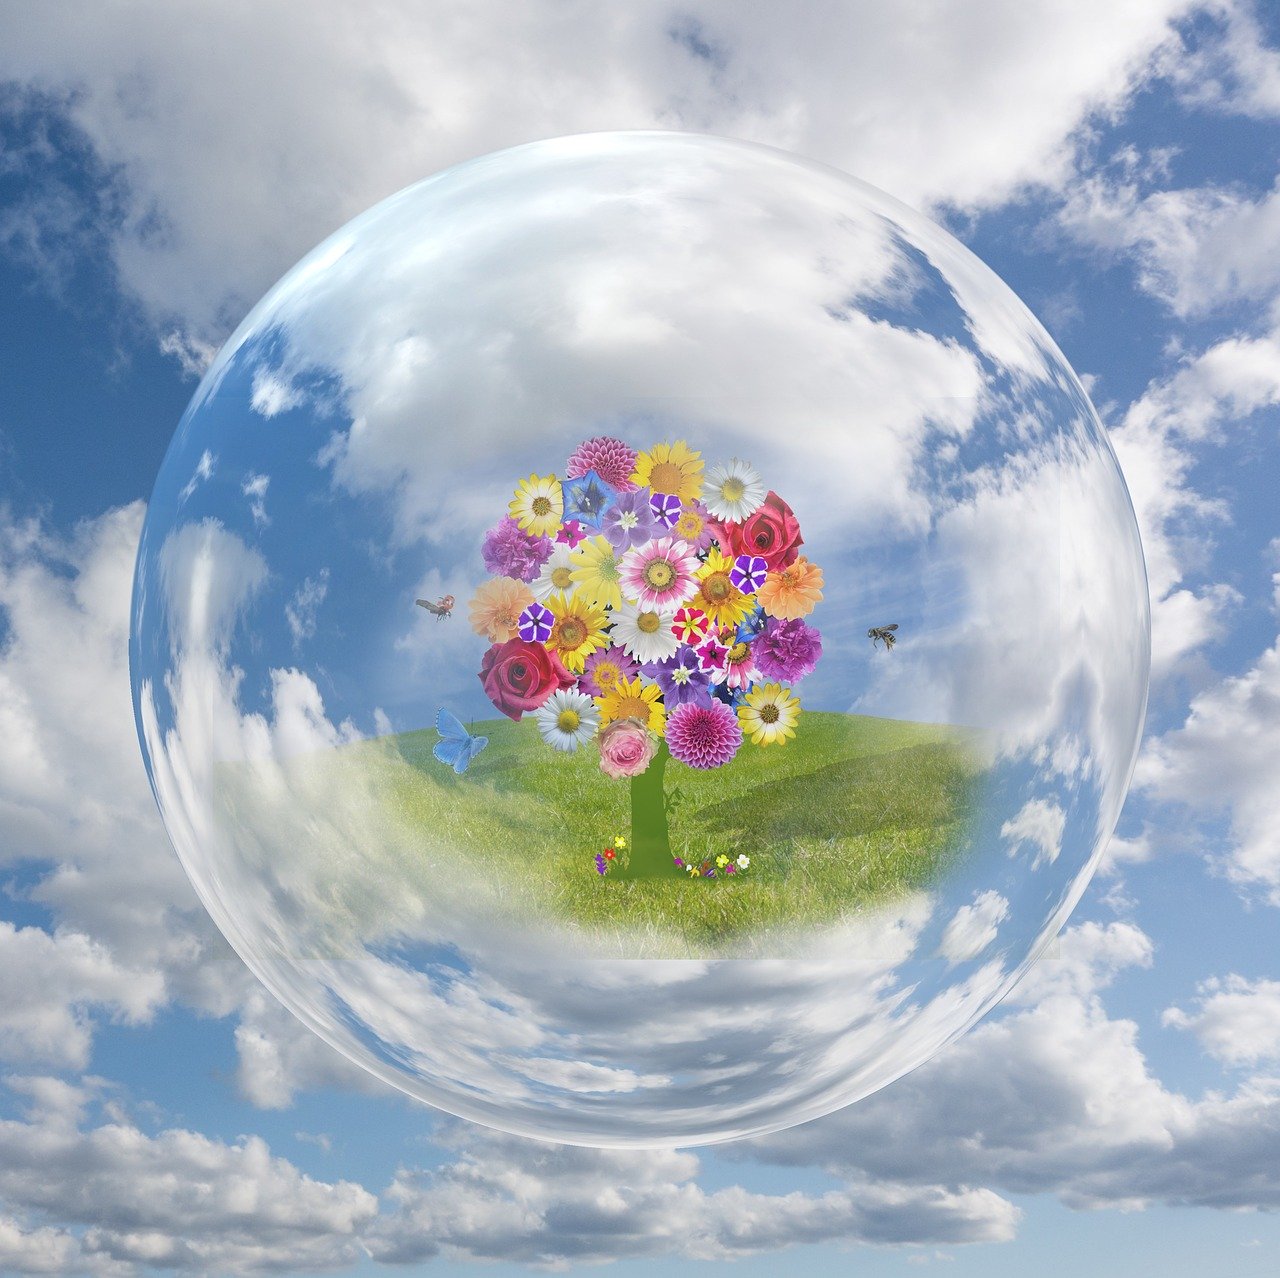 We might feel like we're living in a bubble, but we have a golden opportunity to improve our indoor environments. Photo: Beate Bachmann/Pixabay